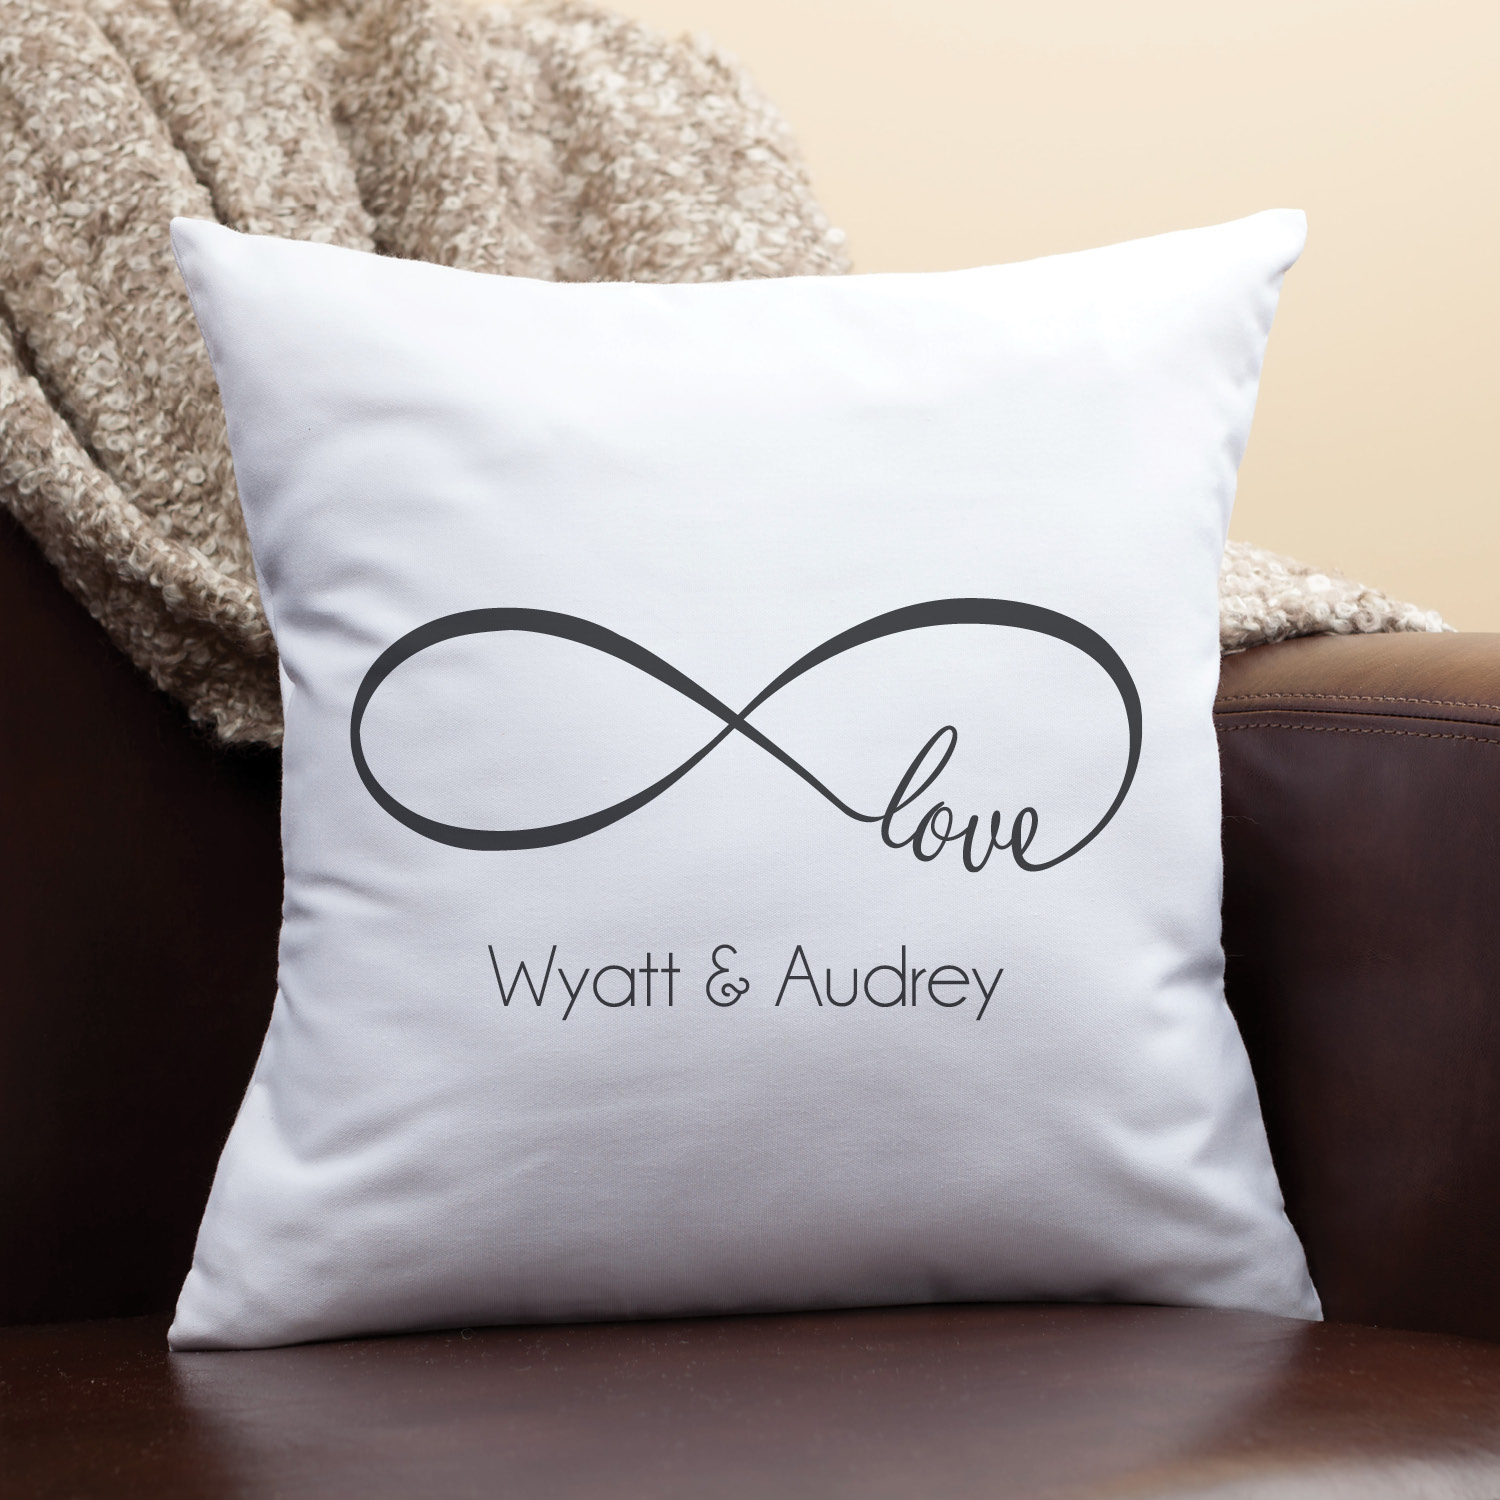 Our Love Personalized Throw Pillow